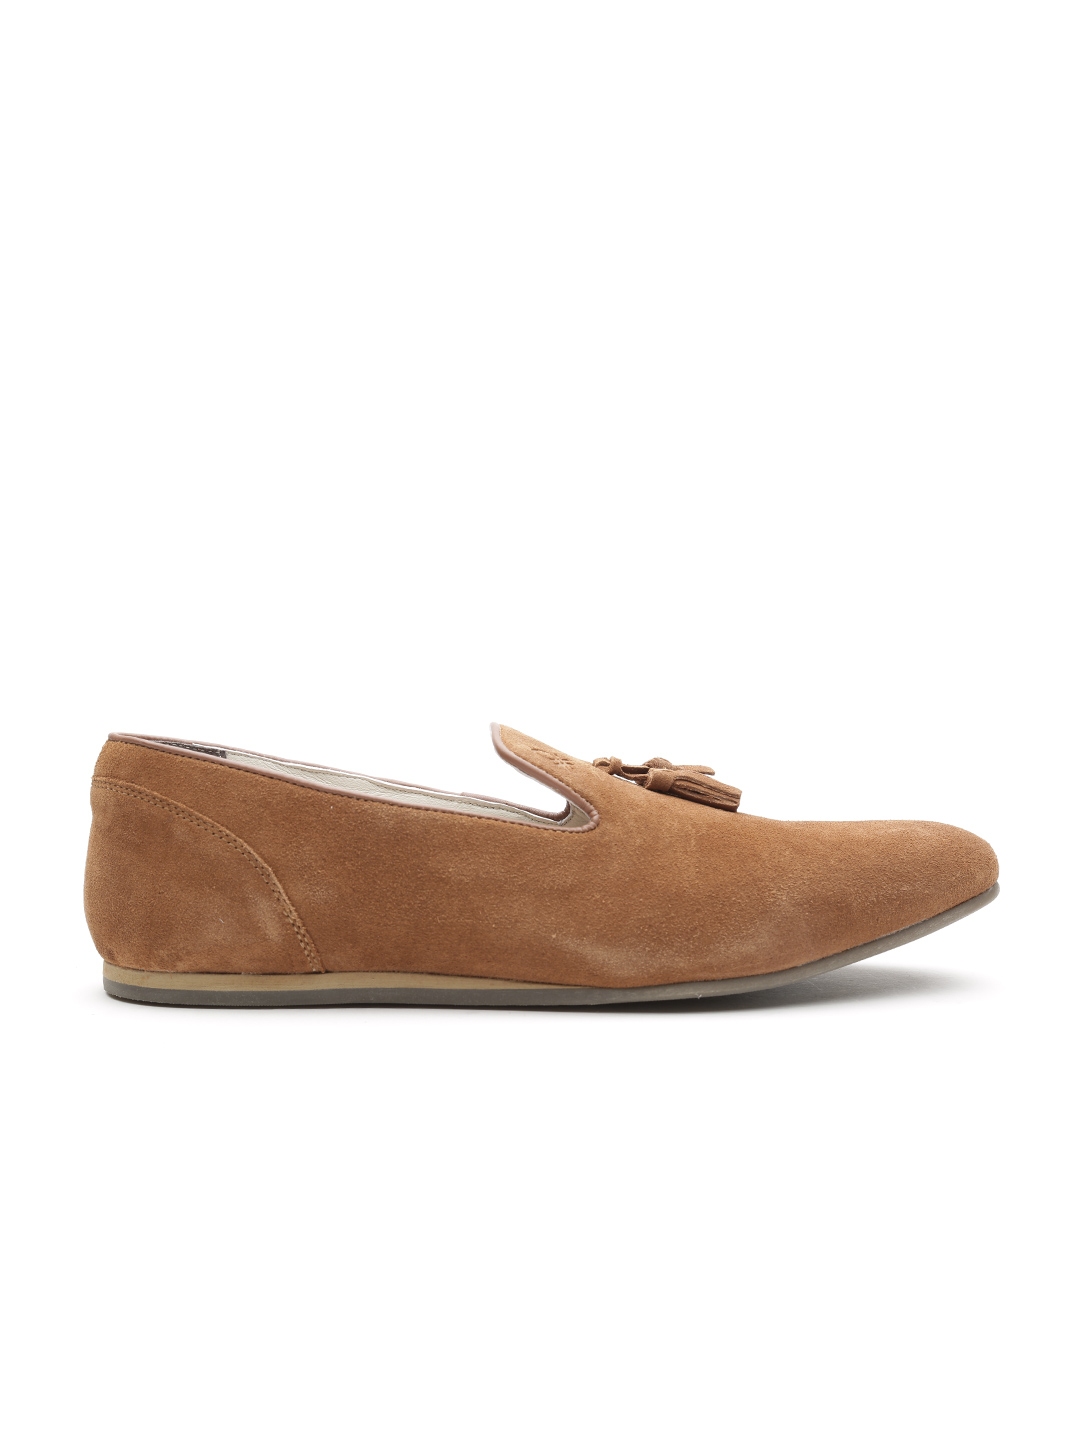 Buy United Colors Of Men Tan Brown Suede Tassel Loafers - Casual Shoes for Men 1490623 | Myntra